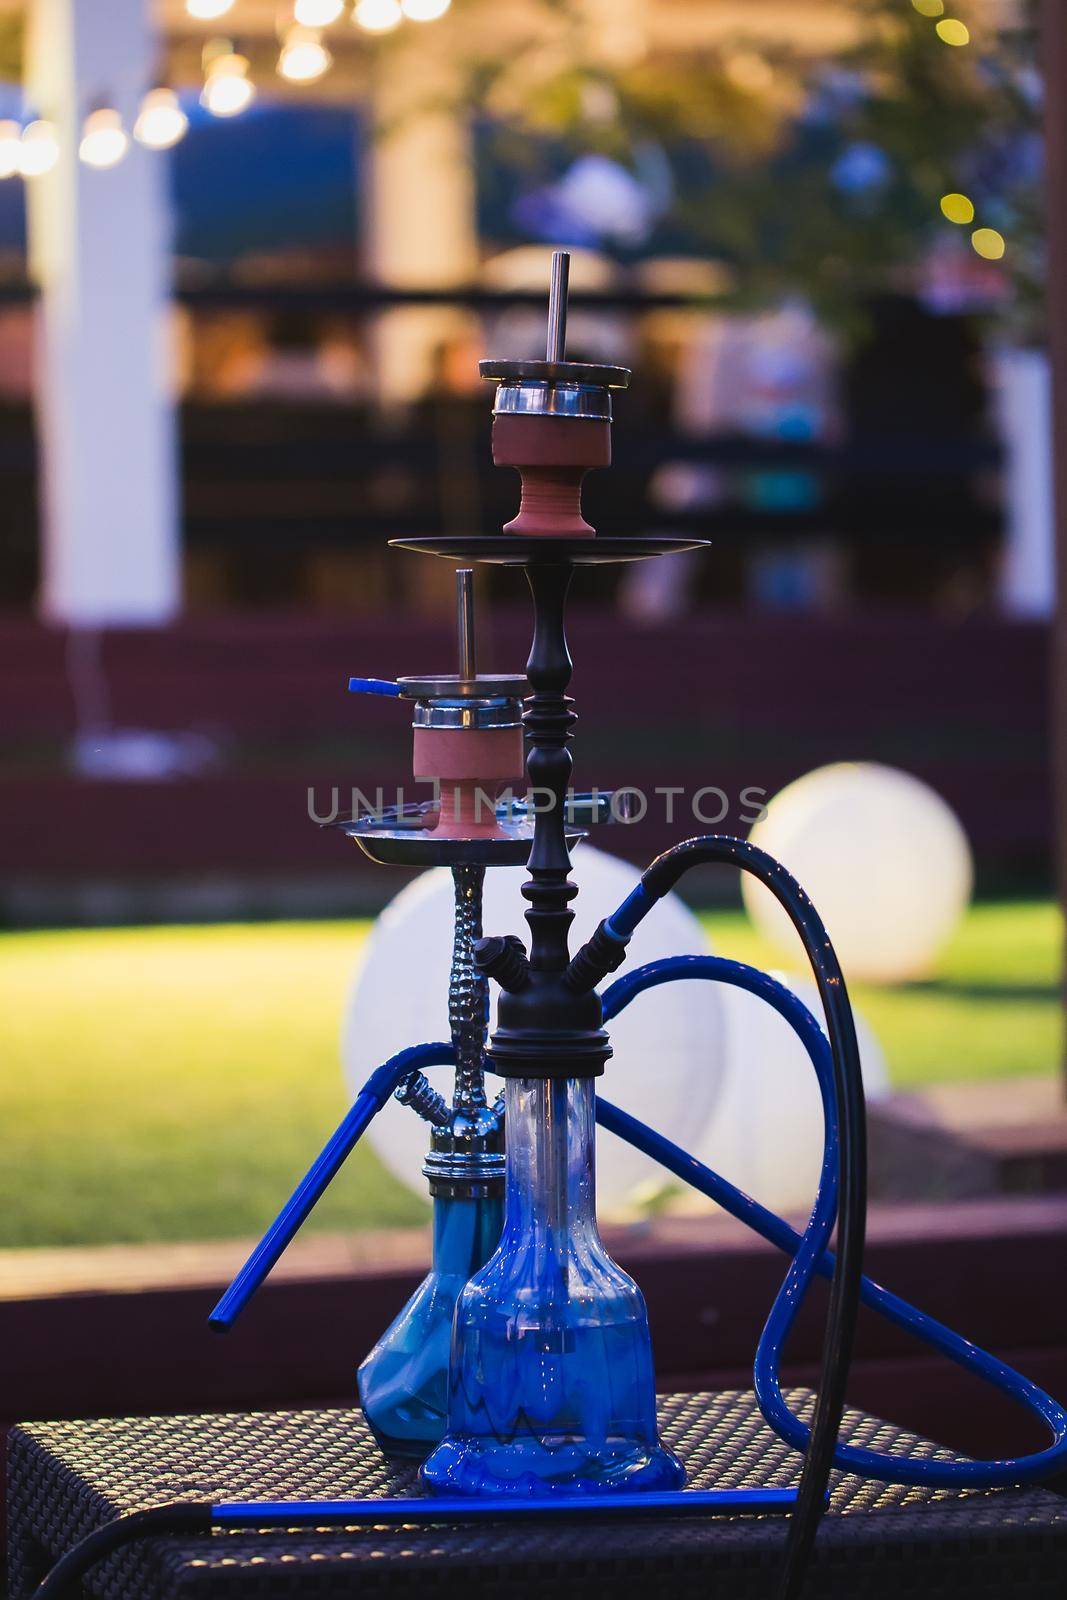 Hookah on the street. Have a nice time with friends.